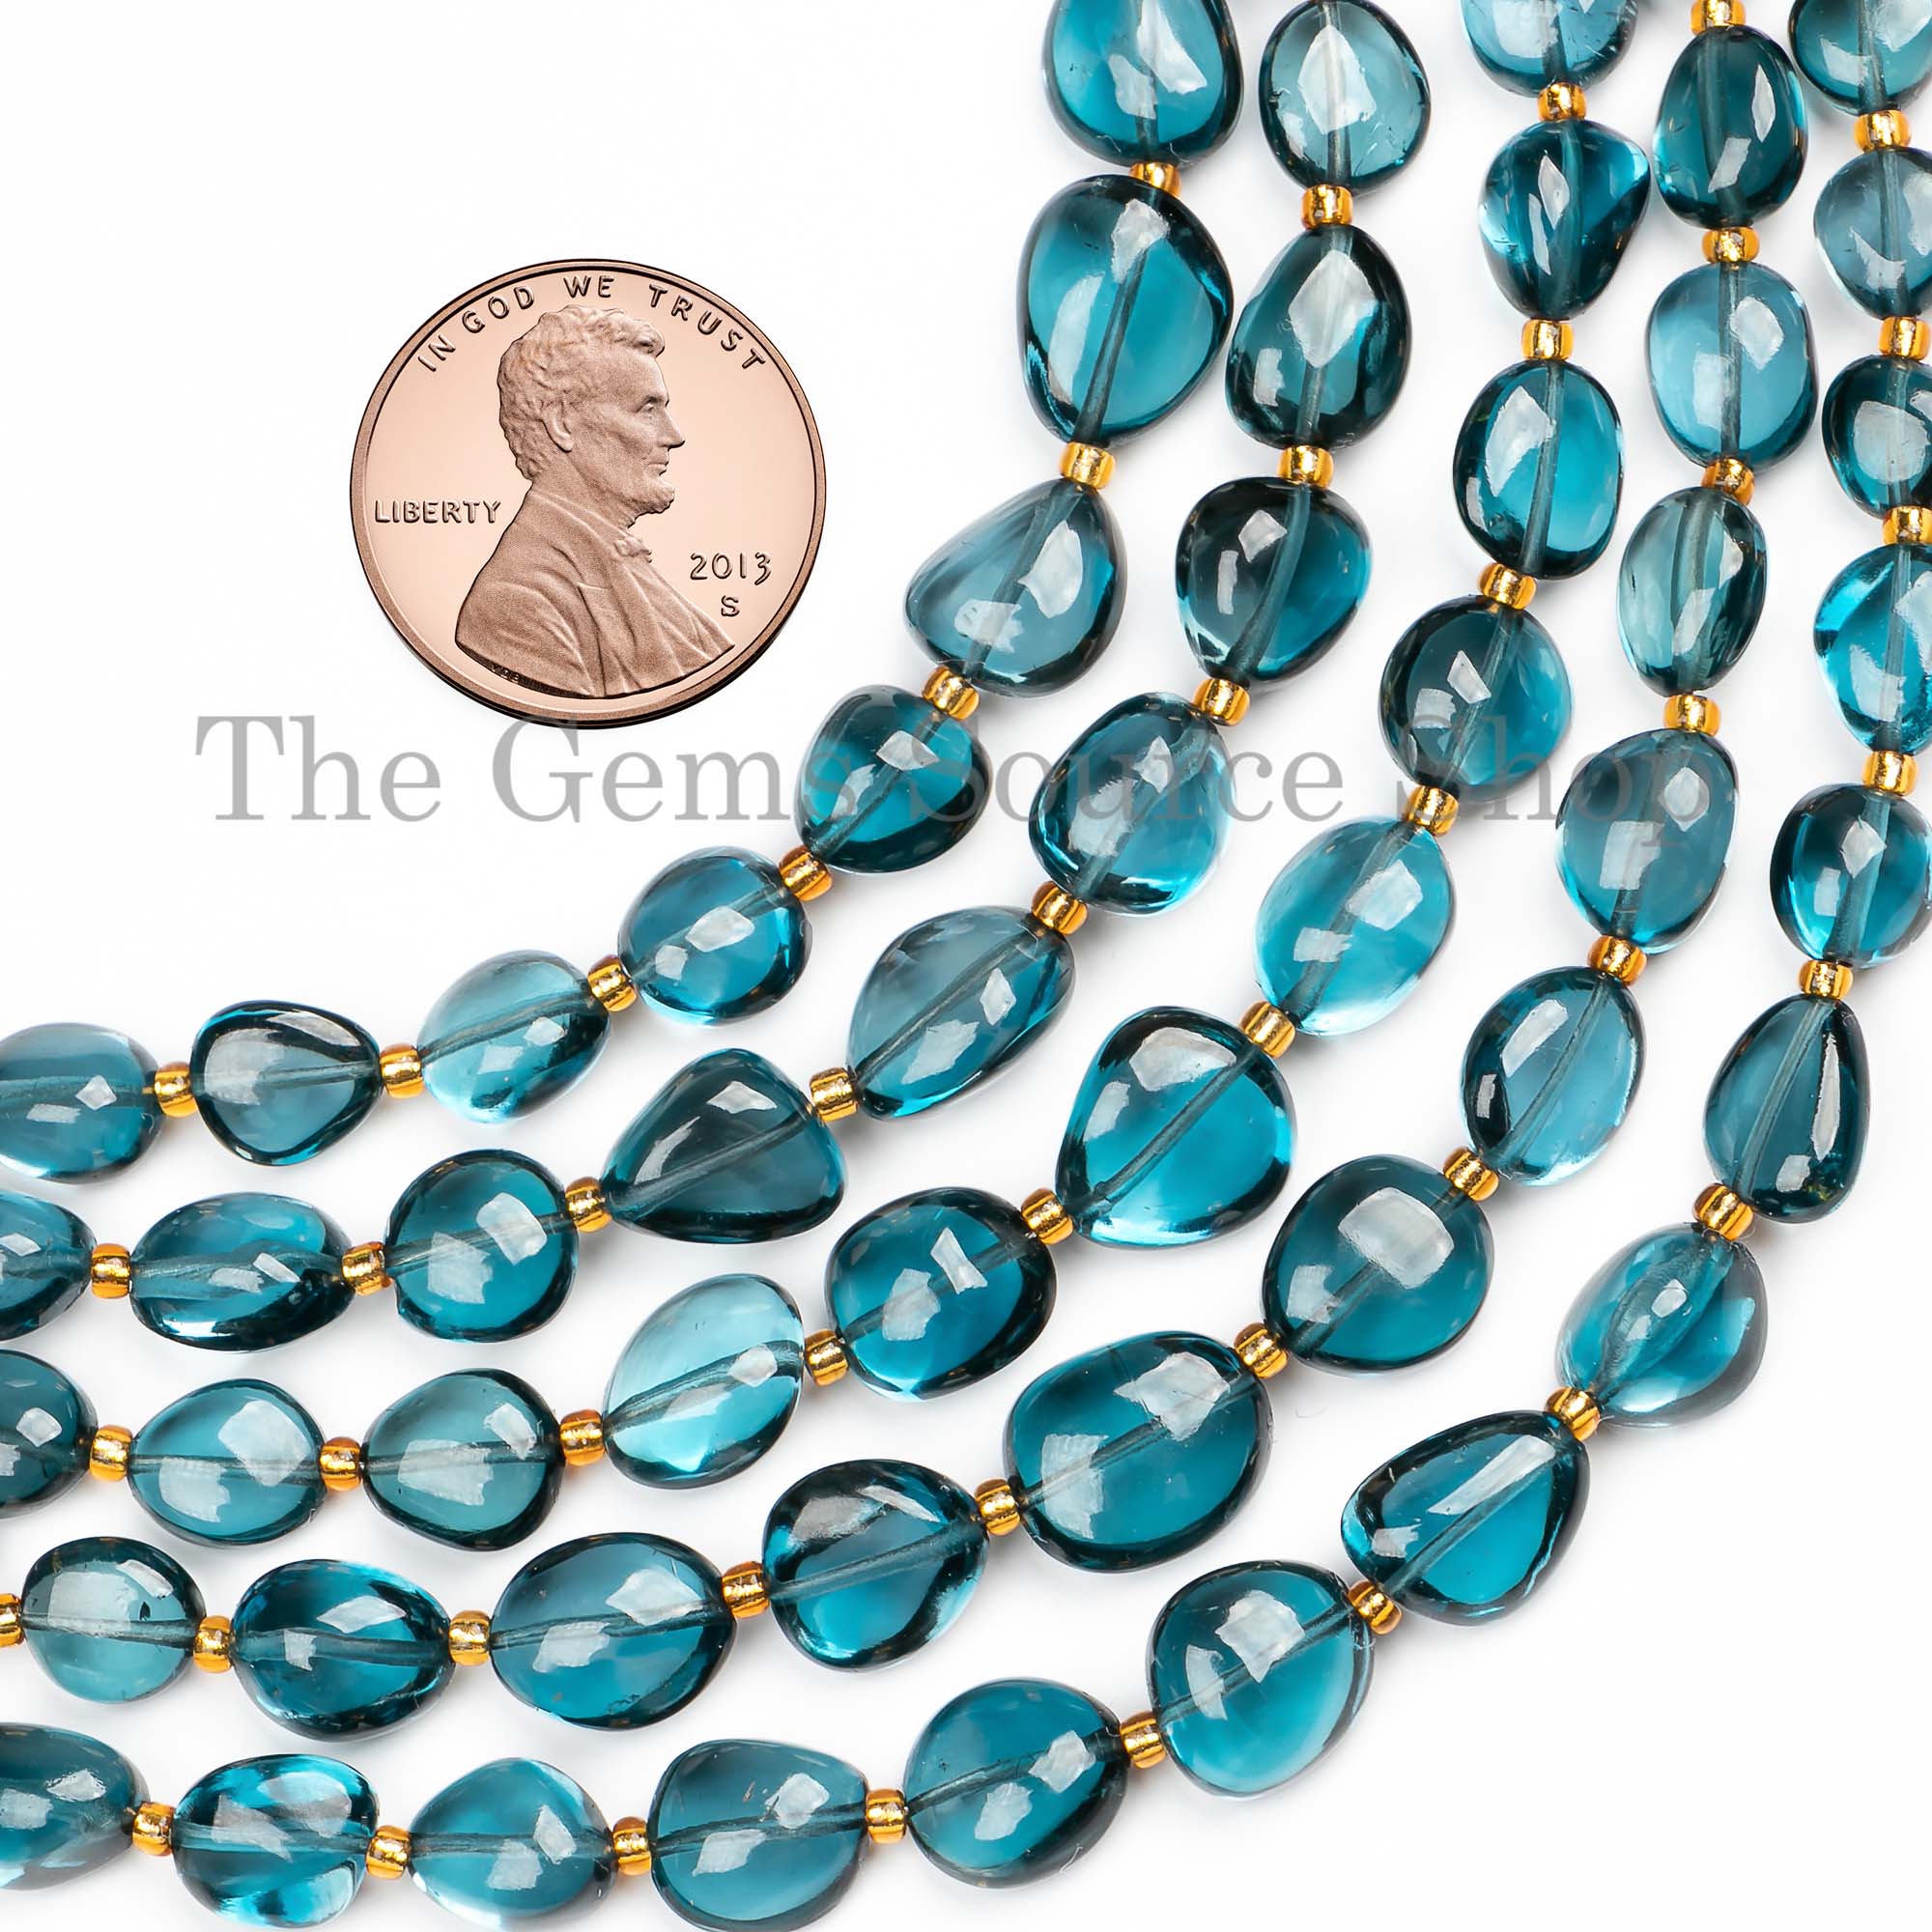 Natural London Blue Topaz Nugget Beads, Smooth Nugget Beads, Plain Blue Topaz Nugget